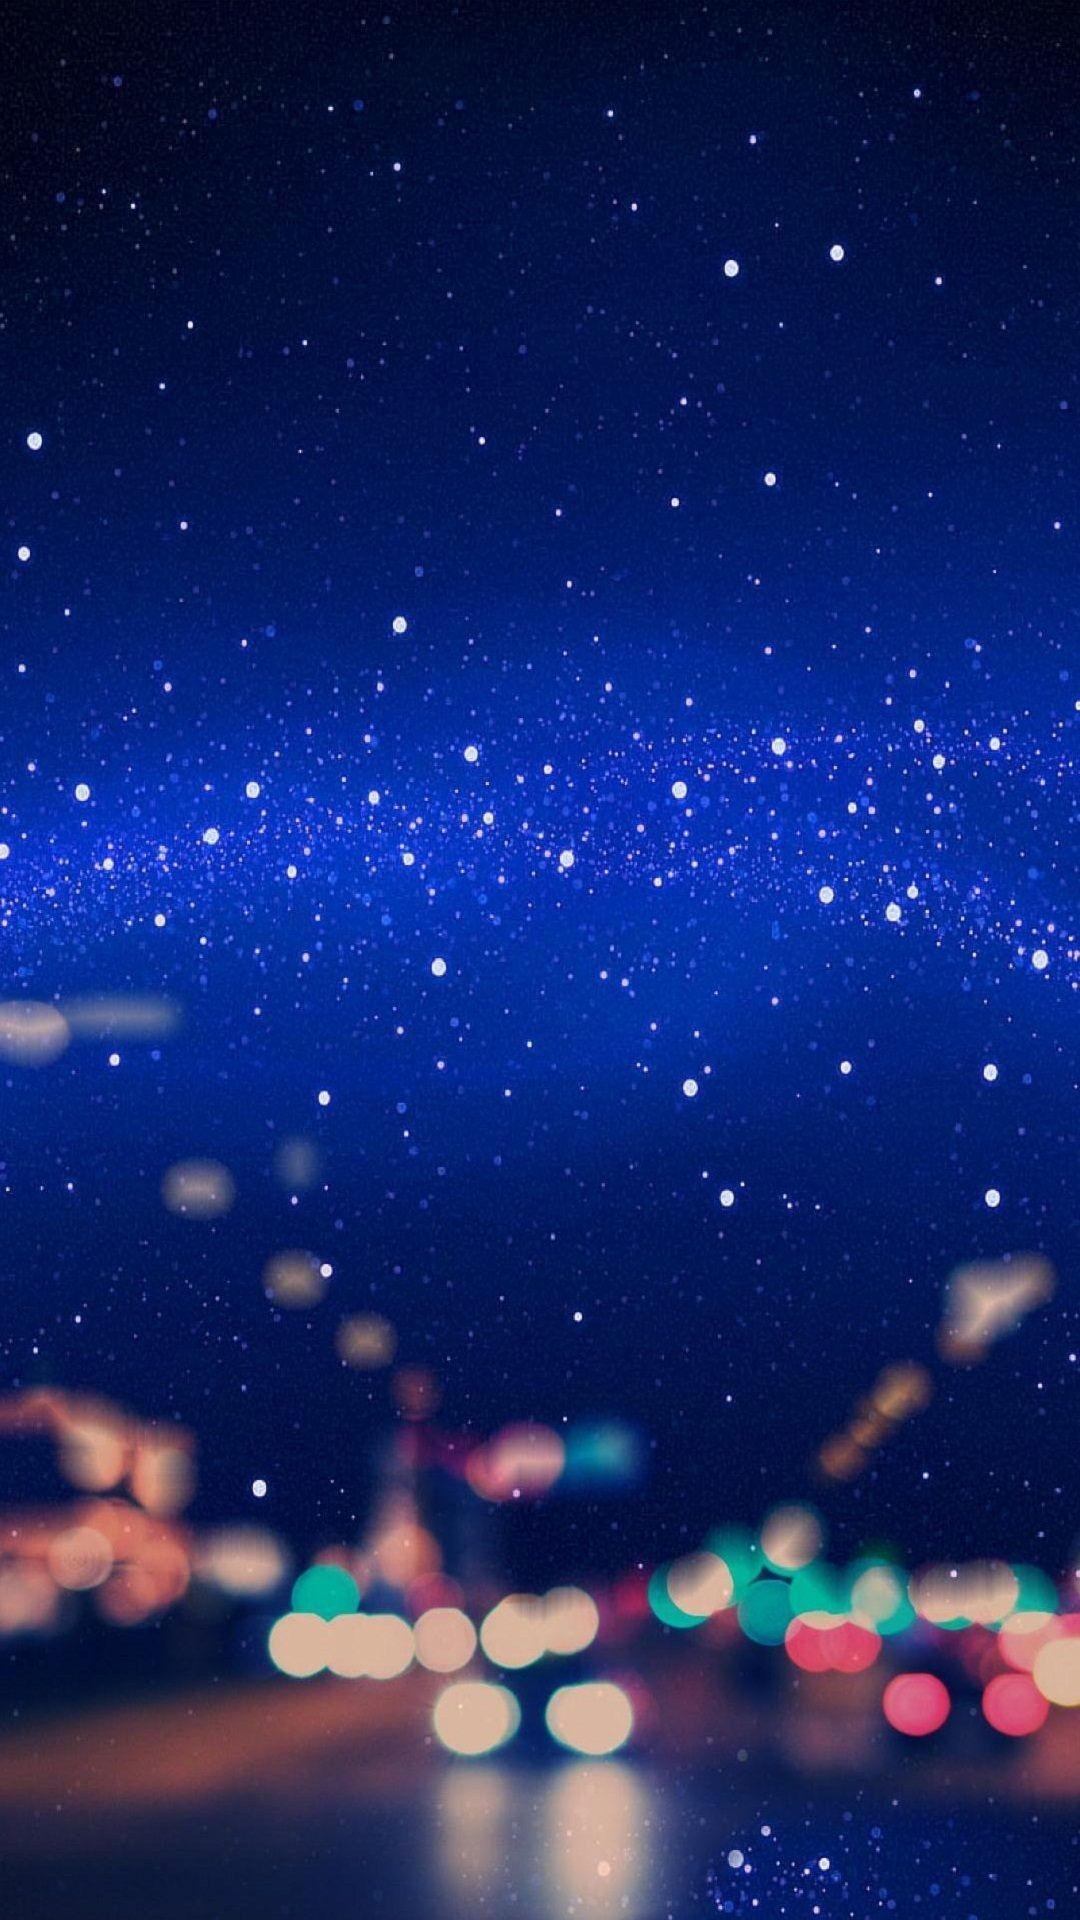 Blue Sky With Stars Wallpaper